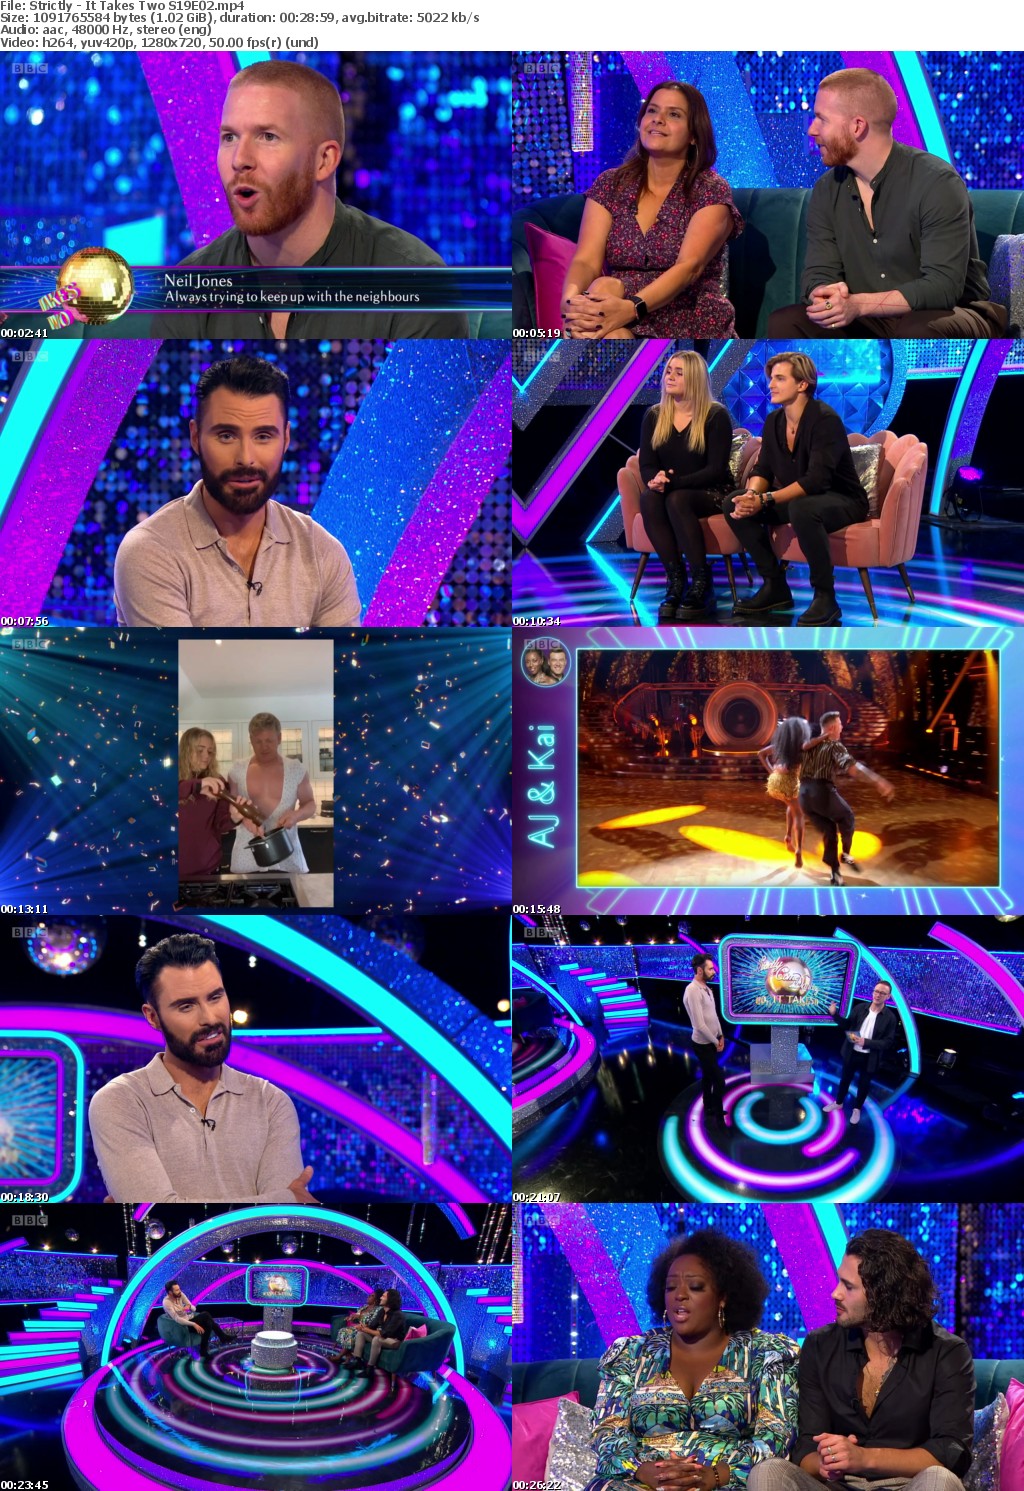 Strictly - It Takes Two S19E02 (1280x720p HD, 50fps, soft Eng subs)